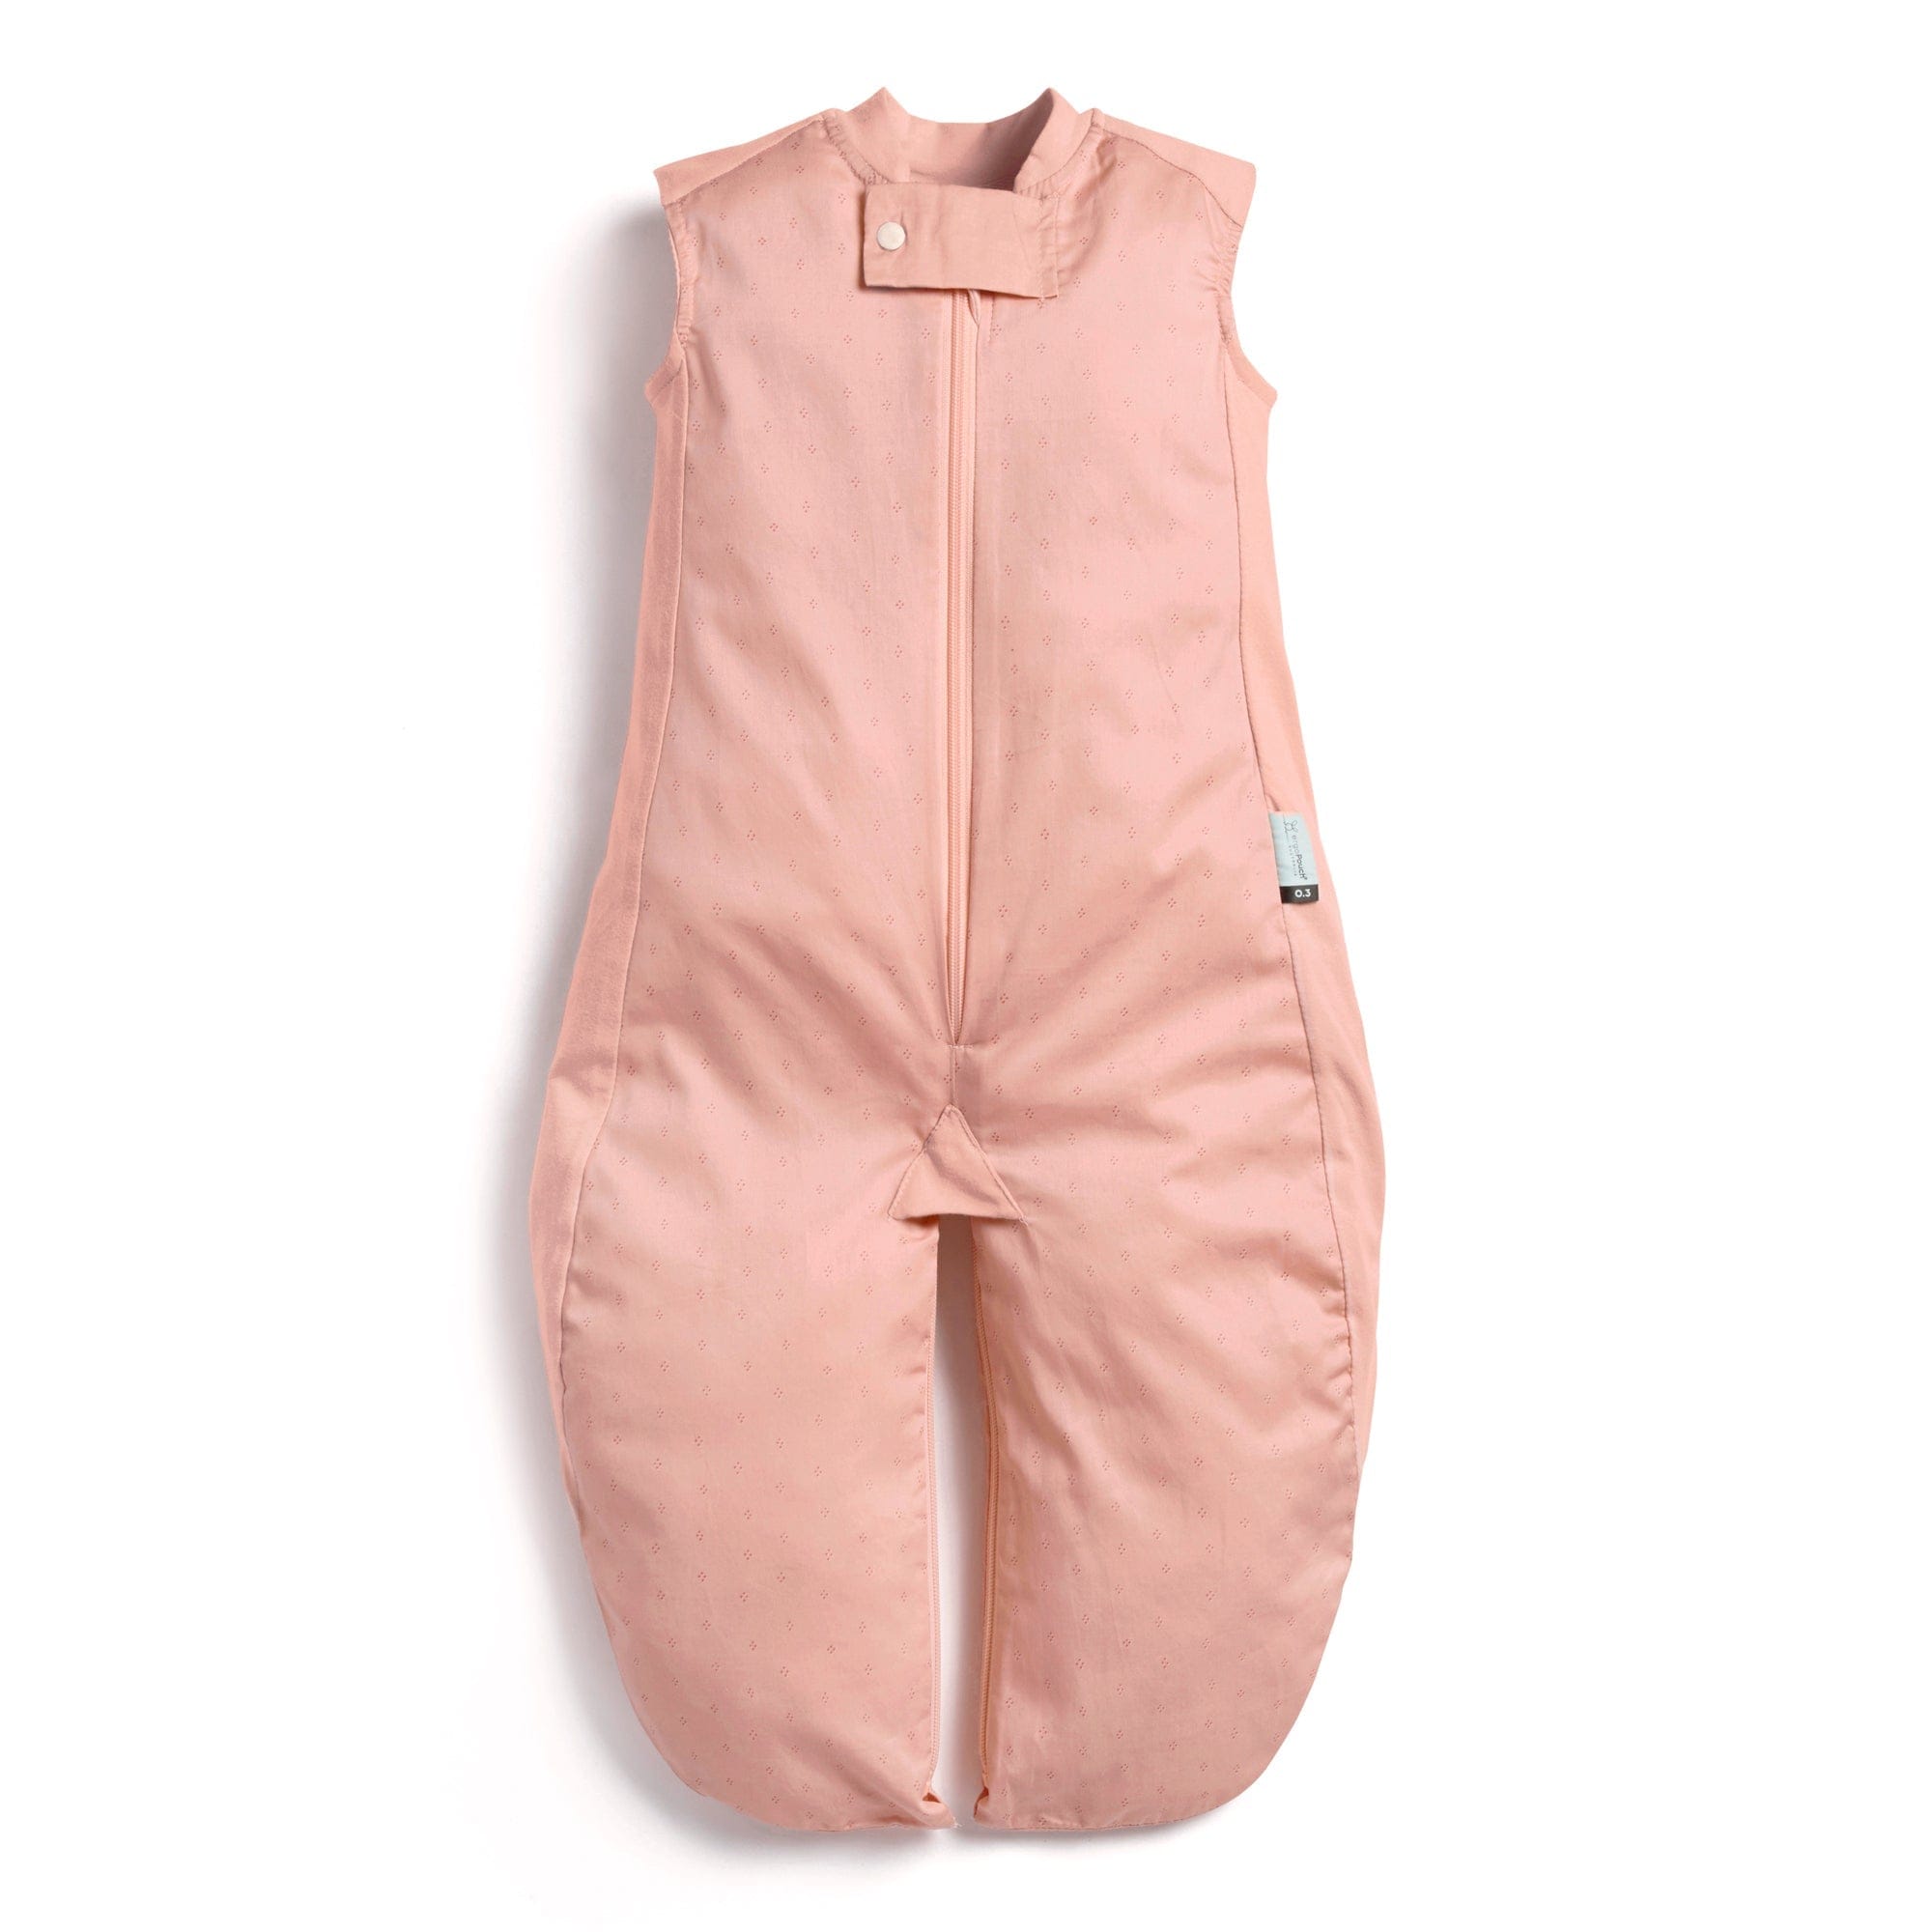 Sleep Suit Bag 0.3 Tog For Kids By ergoPouch - Berries